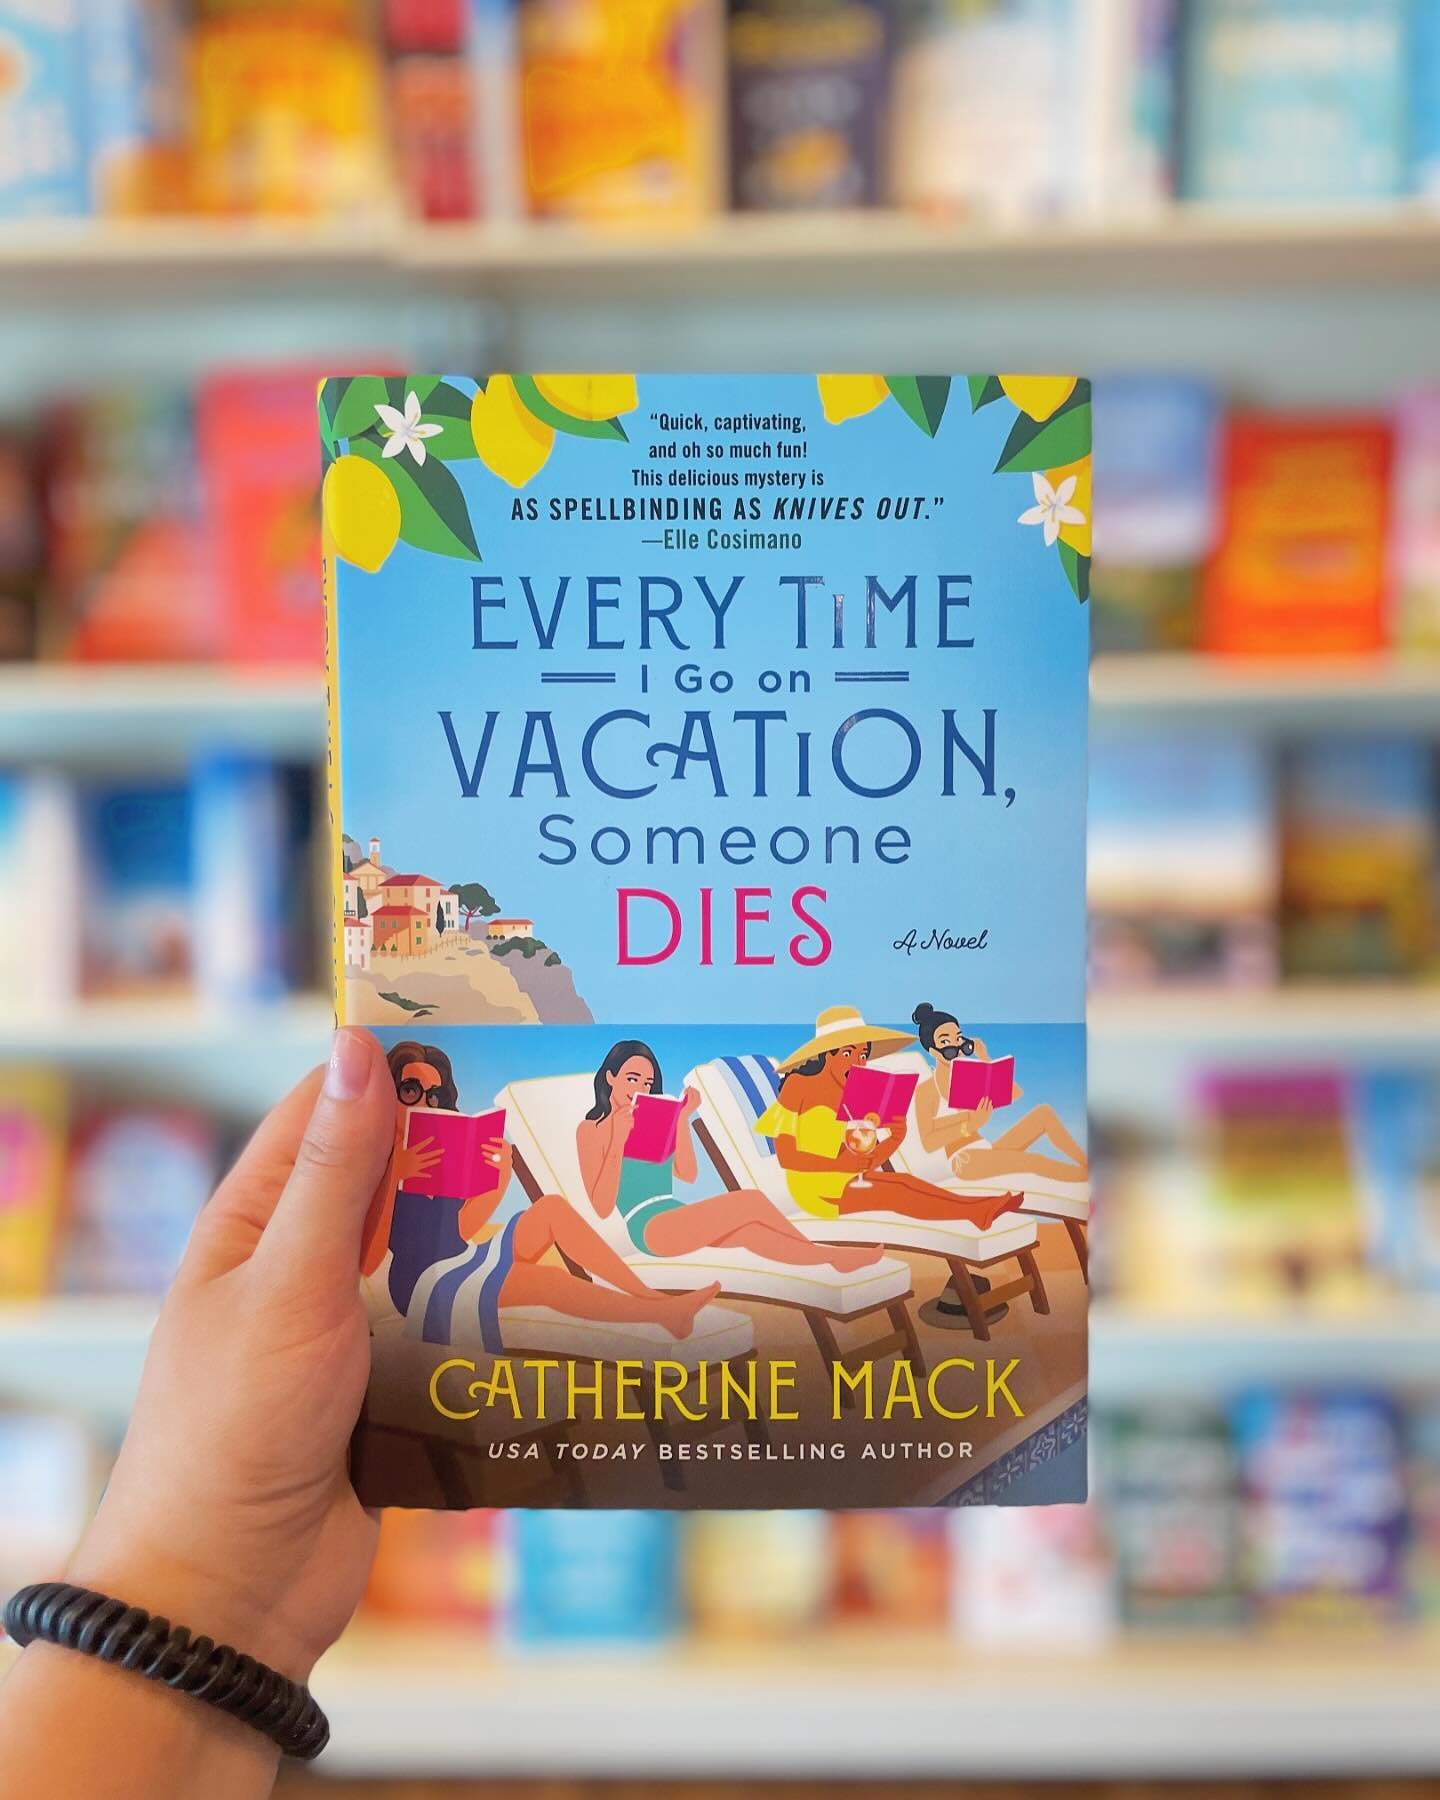 Hurry &amp; Grab your beach bags, towels, and sunglasses-because we&rsquo;ve got a HOT🔥 new read for you to take down to our Pawleys Island Beach!! ☀️👙⛱️🩳🐚🛍️

Come in and grab EVERY TIME I GO ON VACATION SOMEONE DIES by our friend, bestselling a